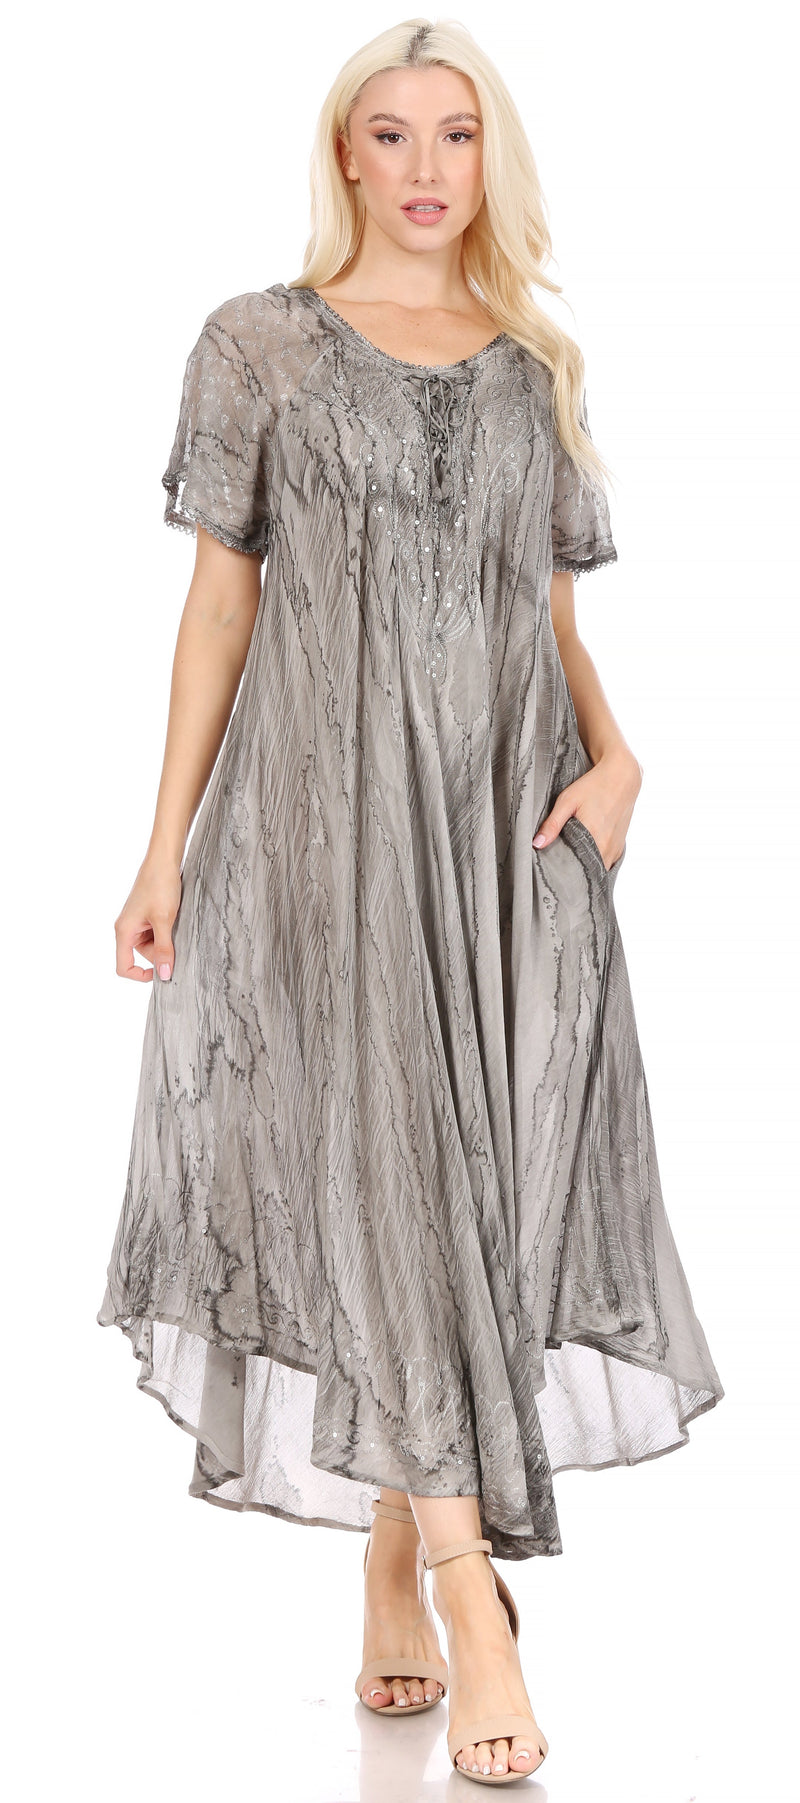 Sakkas Myani Two Tone Embroidered Sheer Cap Sleeve Caftan Long Dress | Cover Up